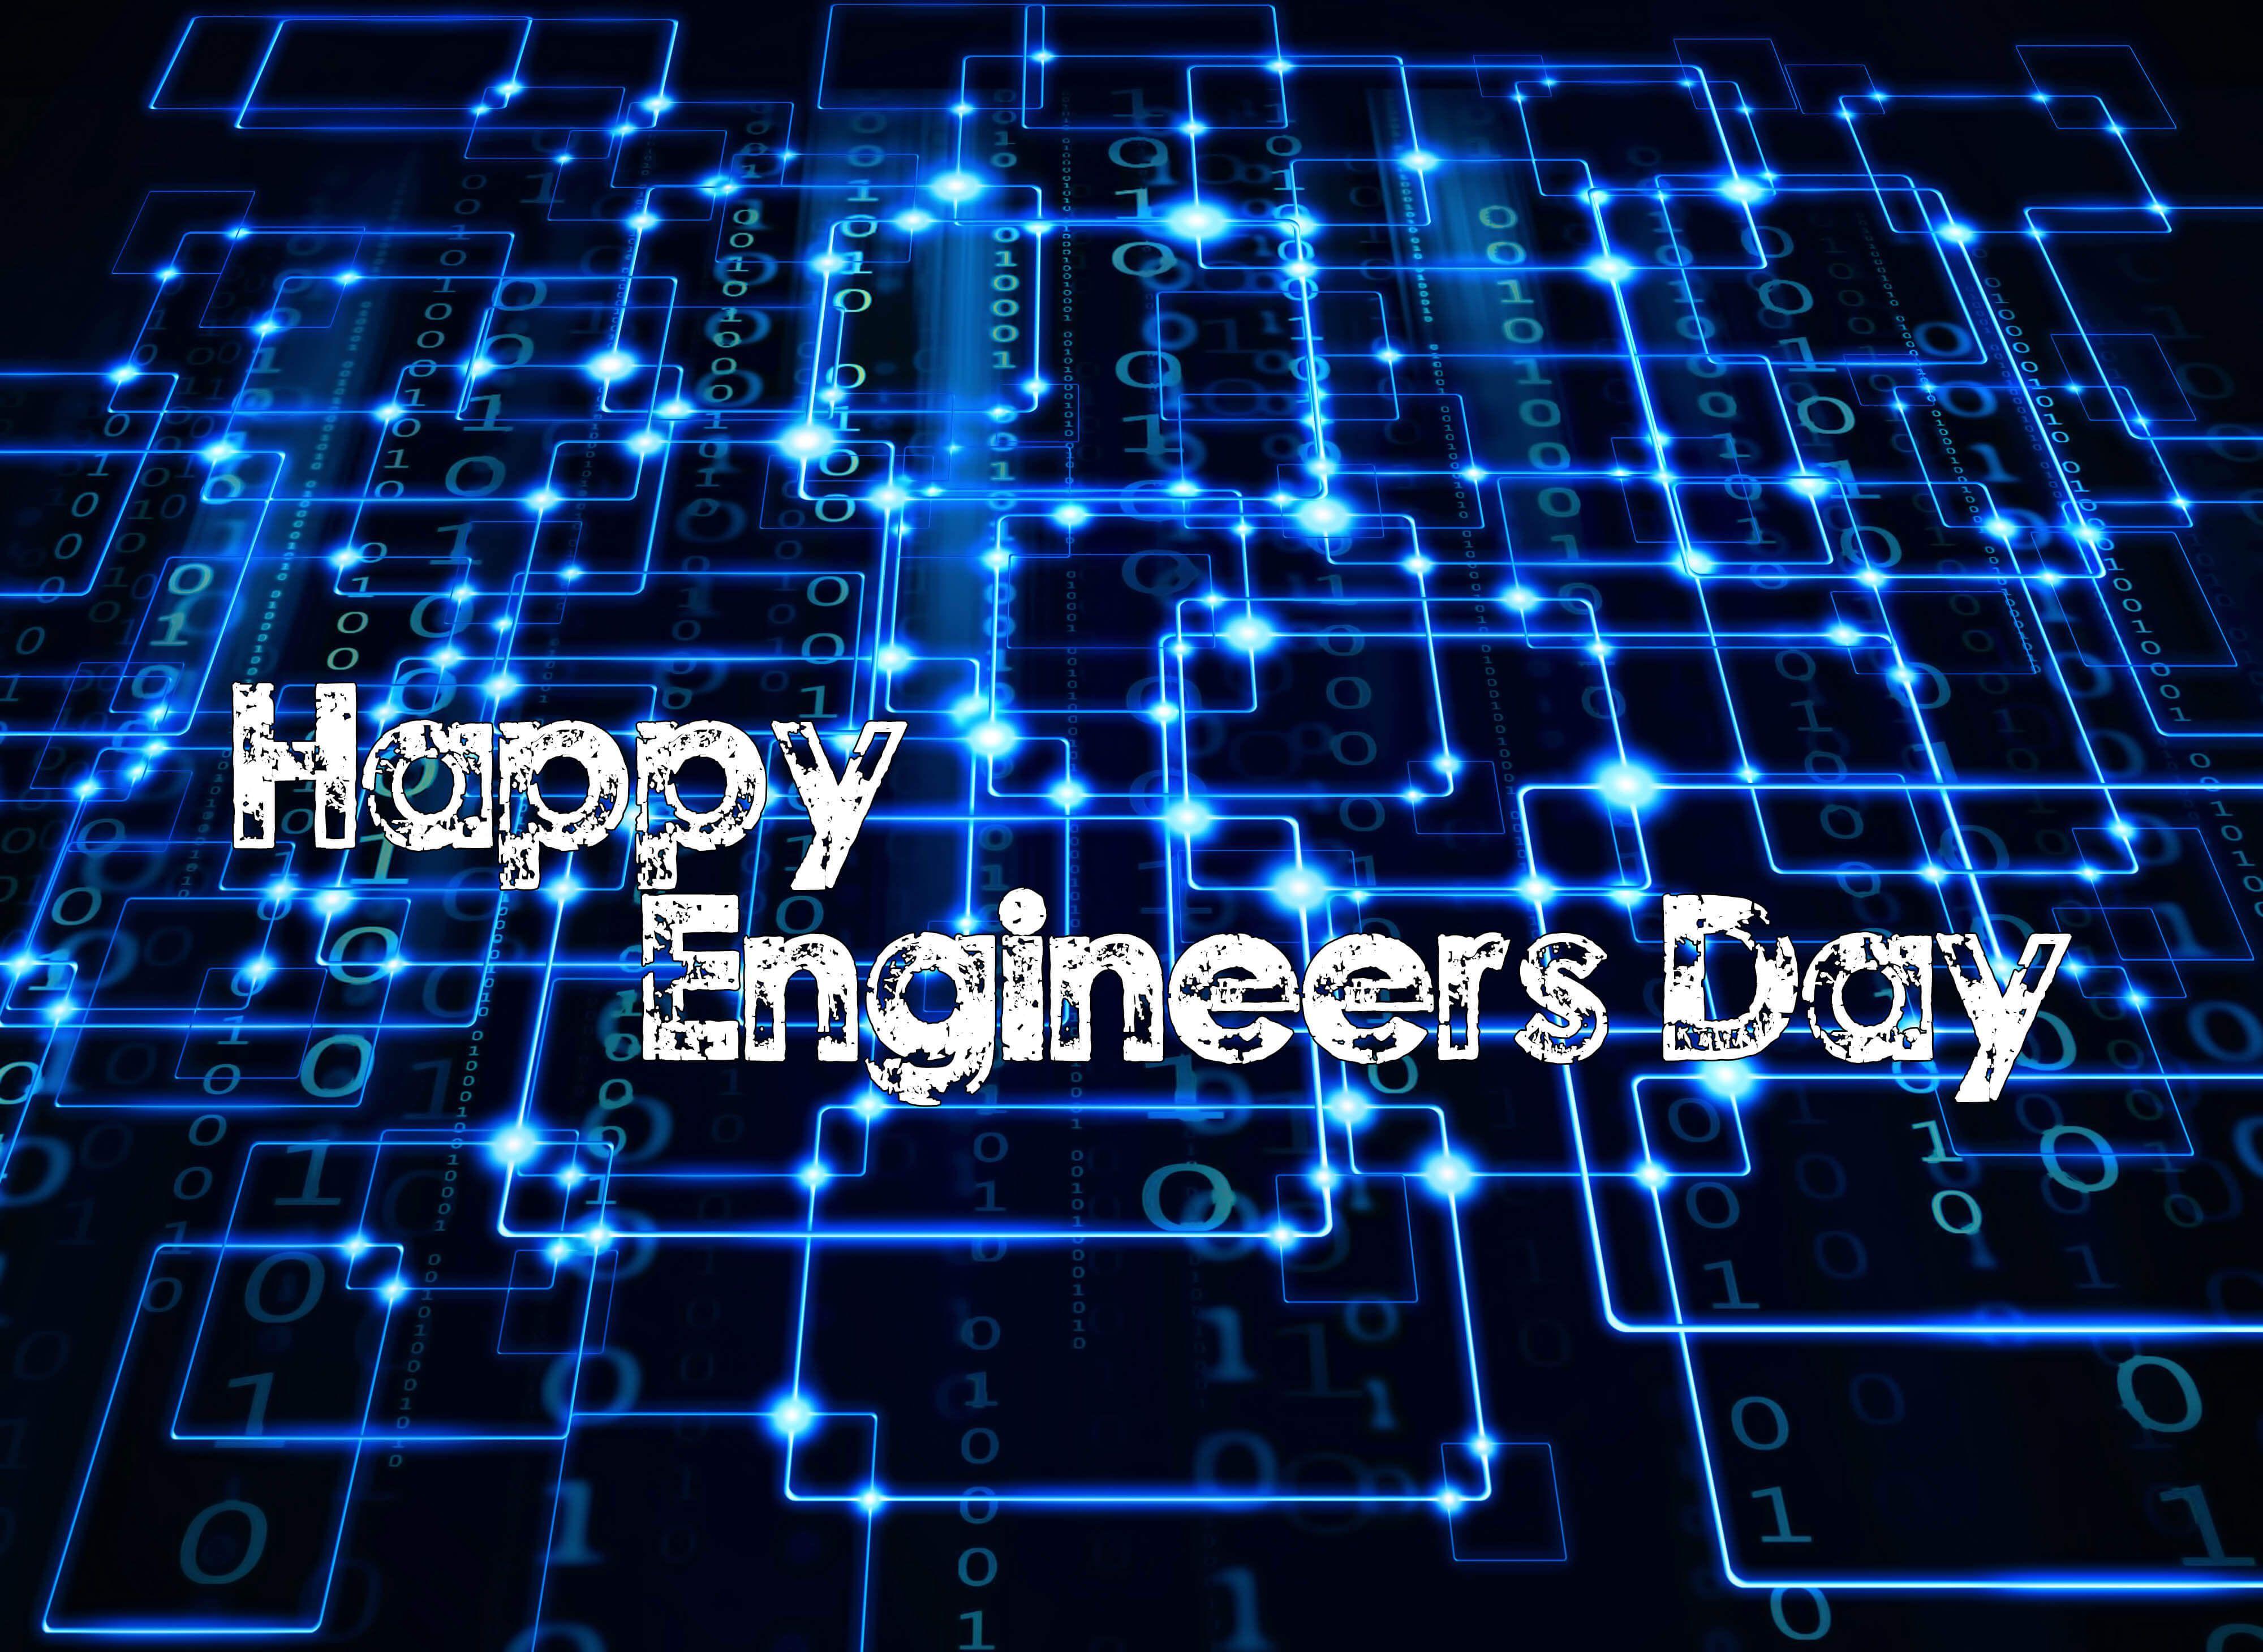 Happy Engineers Day Pictures, HD Images, Ultra-HD Wallpapers, High-Quality  Photos, 3d Pictures, 4k Images For WhatsApp, Viber, Twitter, Instagram, And  Facebook Status